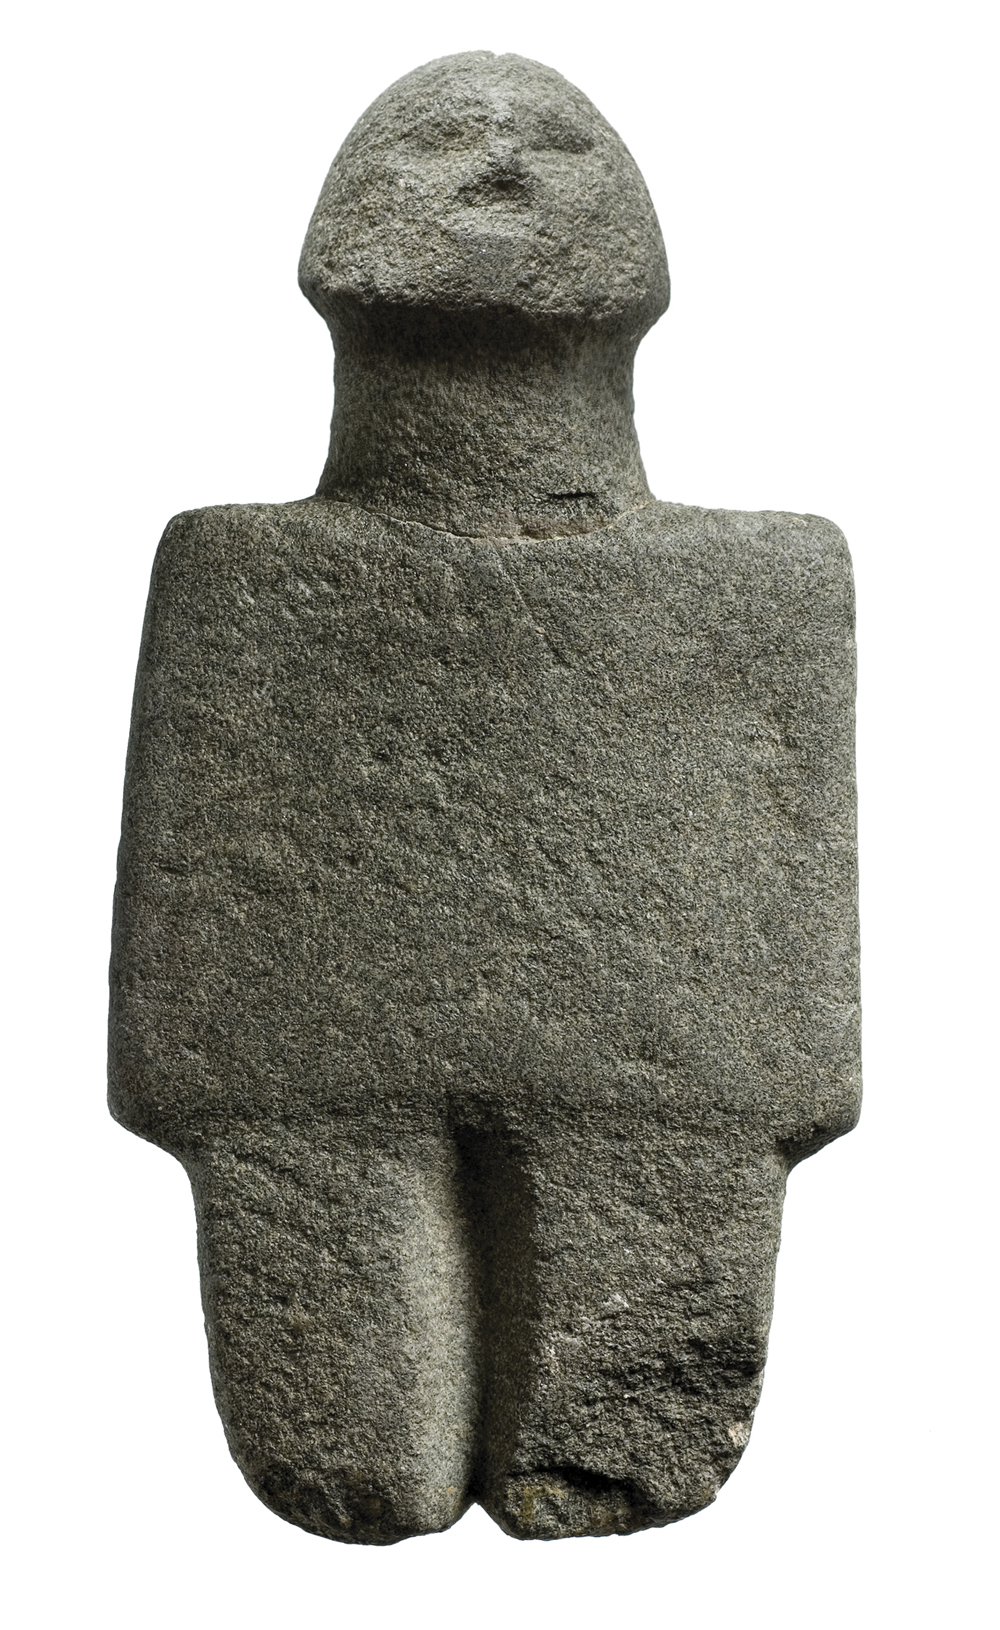 "ANCIENT CYPRUS: Cultures in Dialogue" -Andesite anthropomorphic figurine, 7th-6th millennia BC,